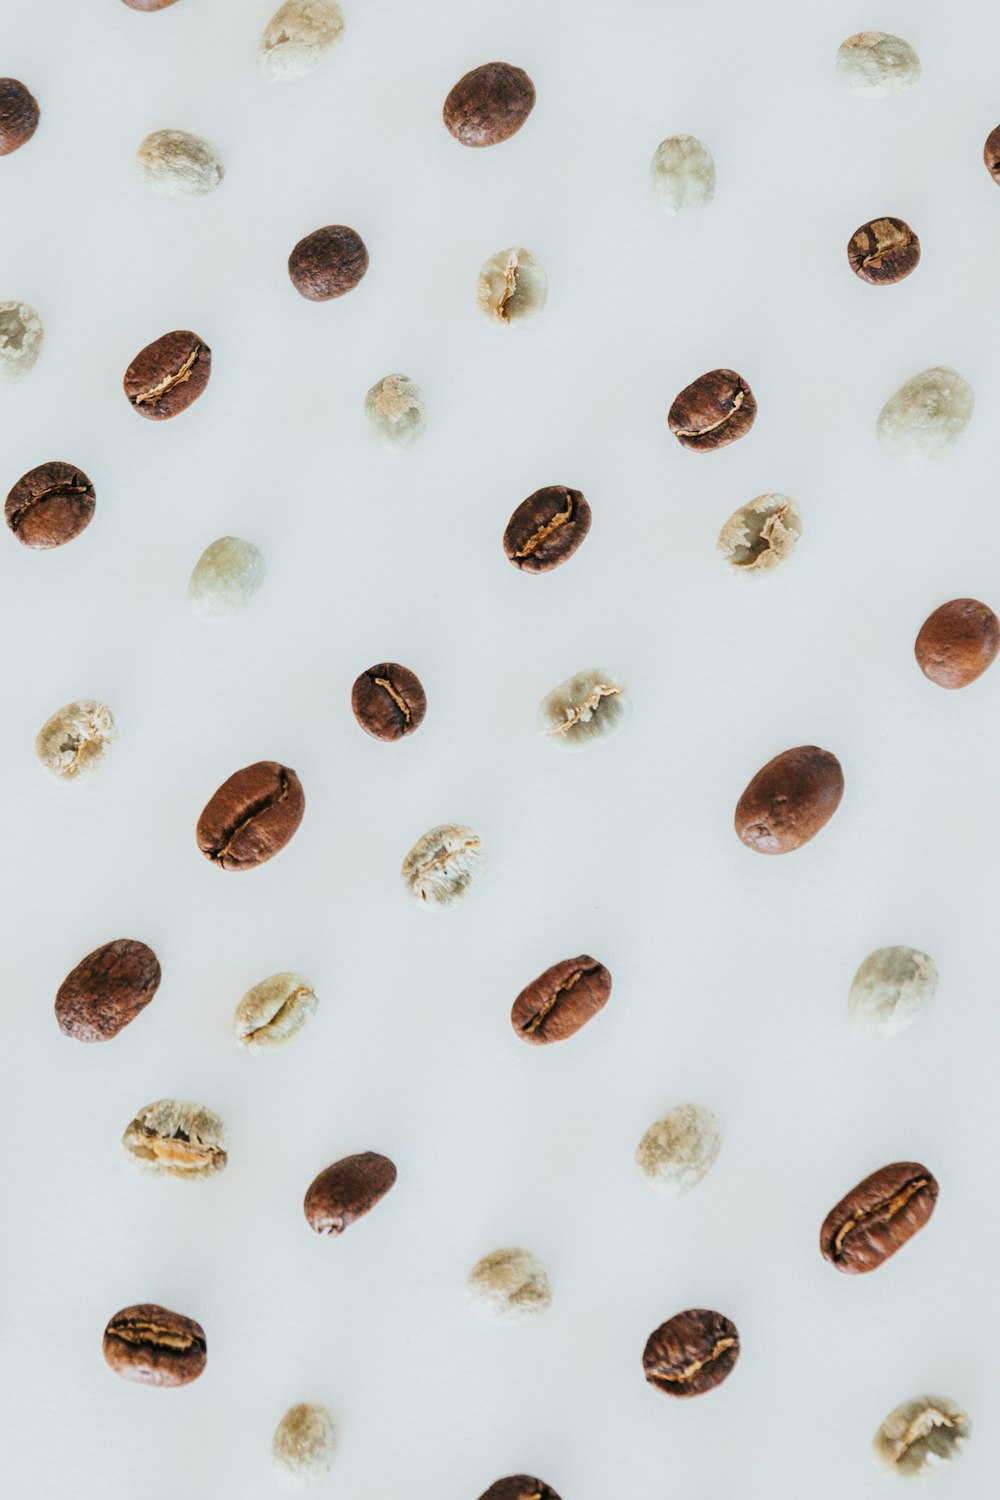 brown and white stones on white surface